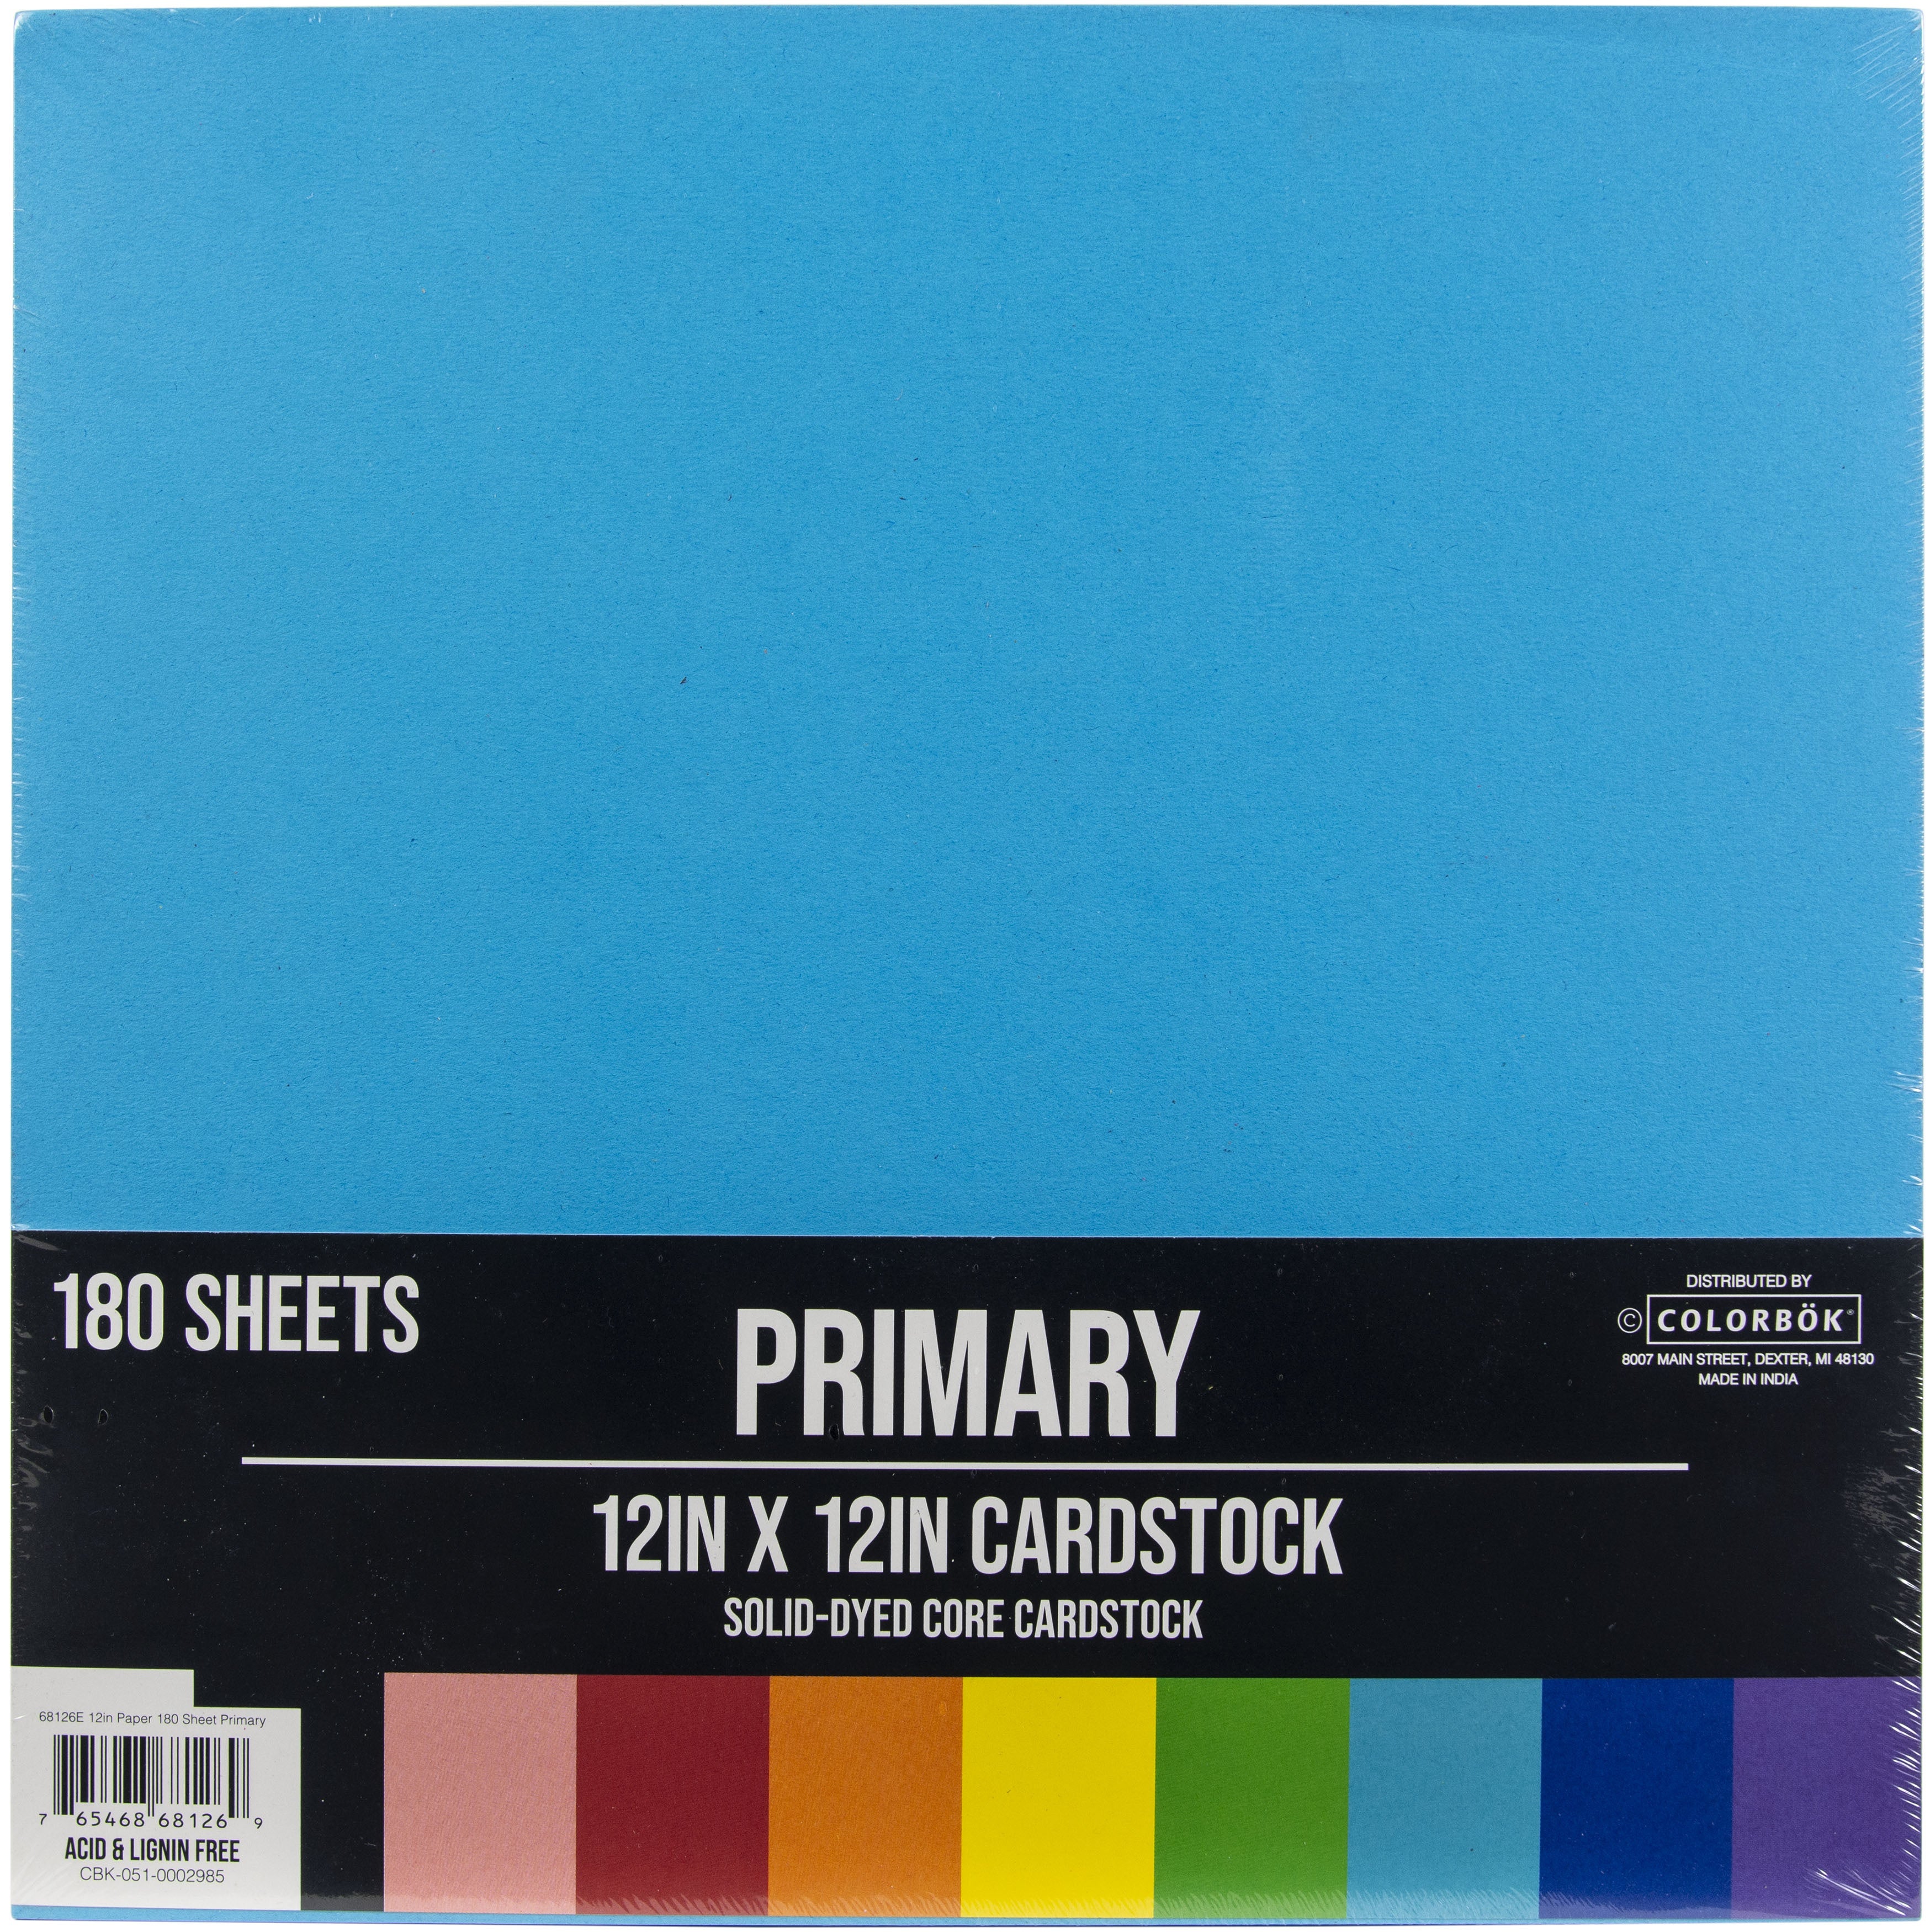 Astrobrights Colored Paper, 8.5 inch x 11 inch, Primary 6-Color Assortment, 120 Sheets